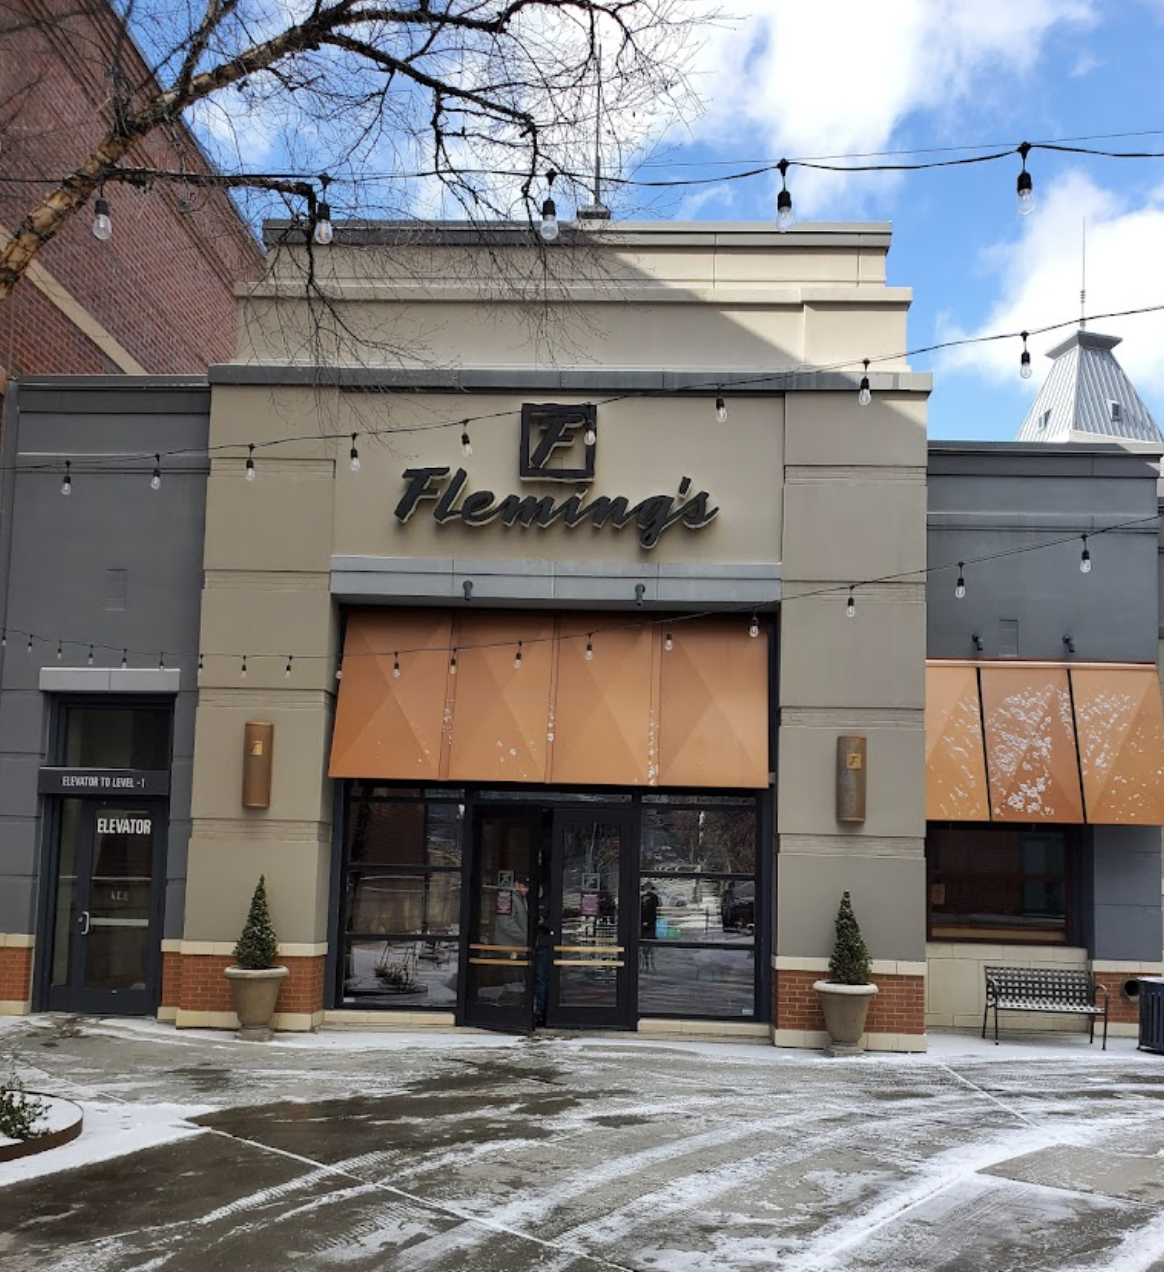 A snow covered facade of Flemings, one of the best steakhouses in Salt Lake City.